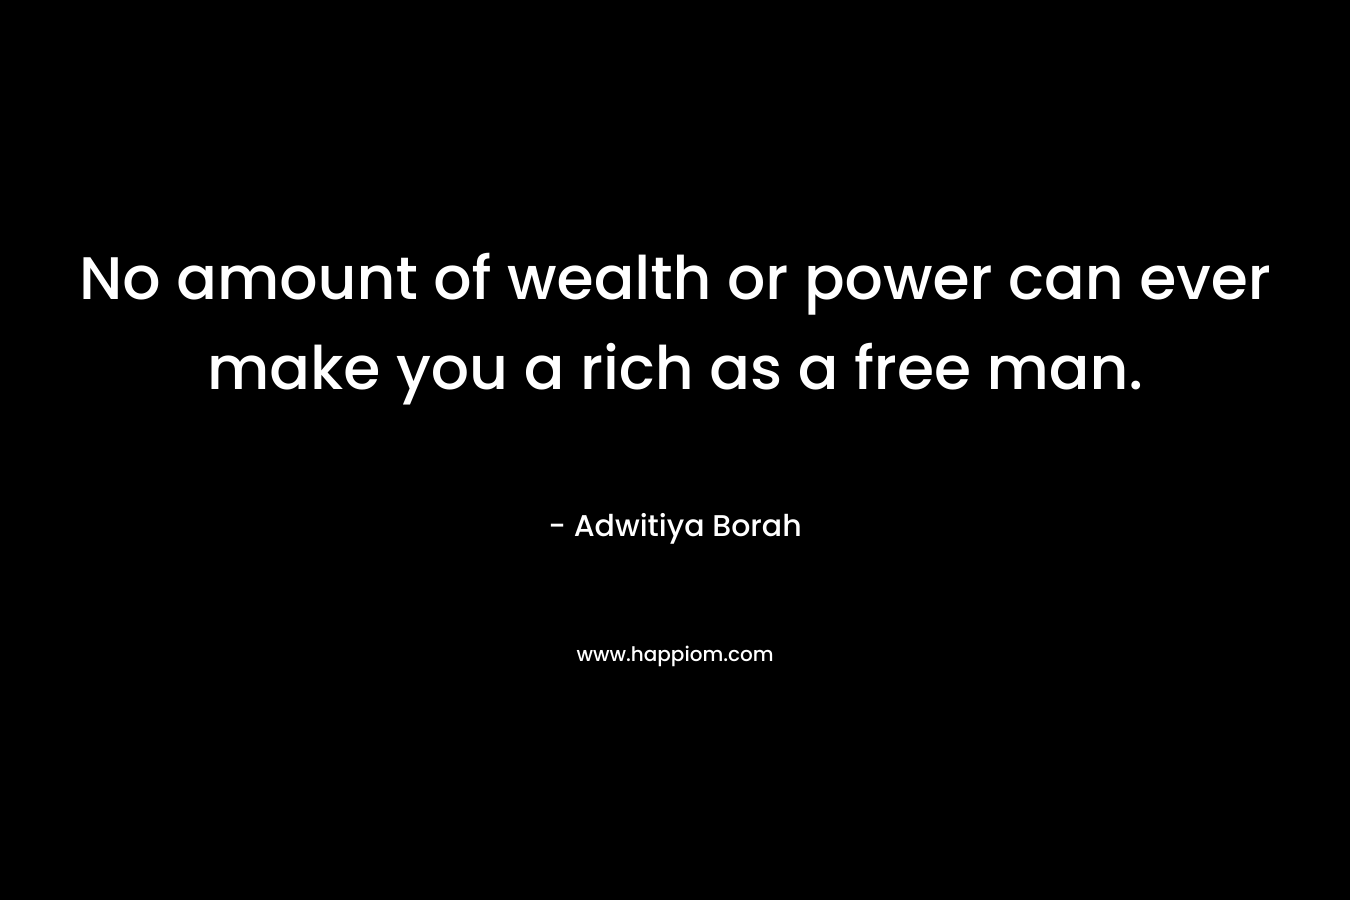 No amount of wealth or power can ever make you a rich as a free man.